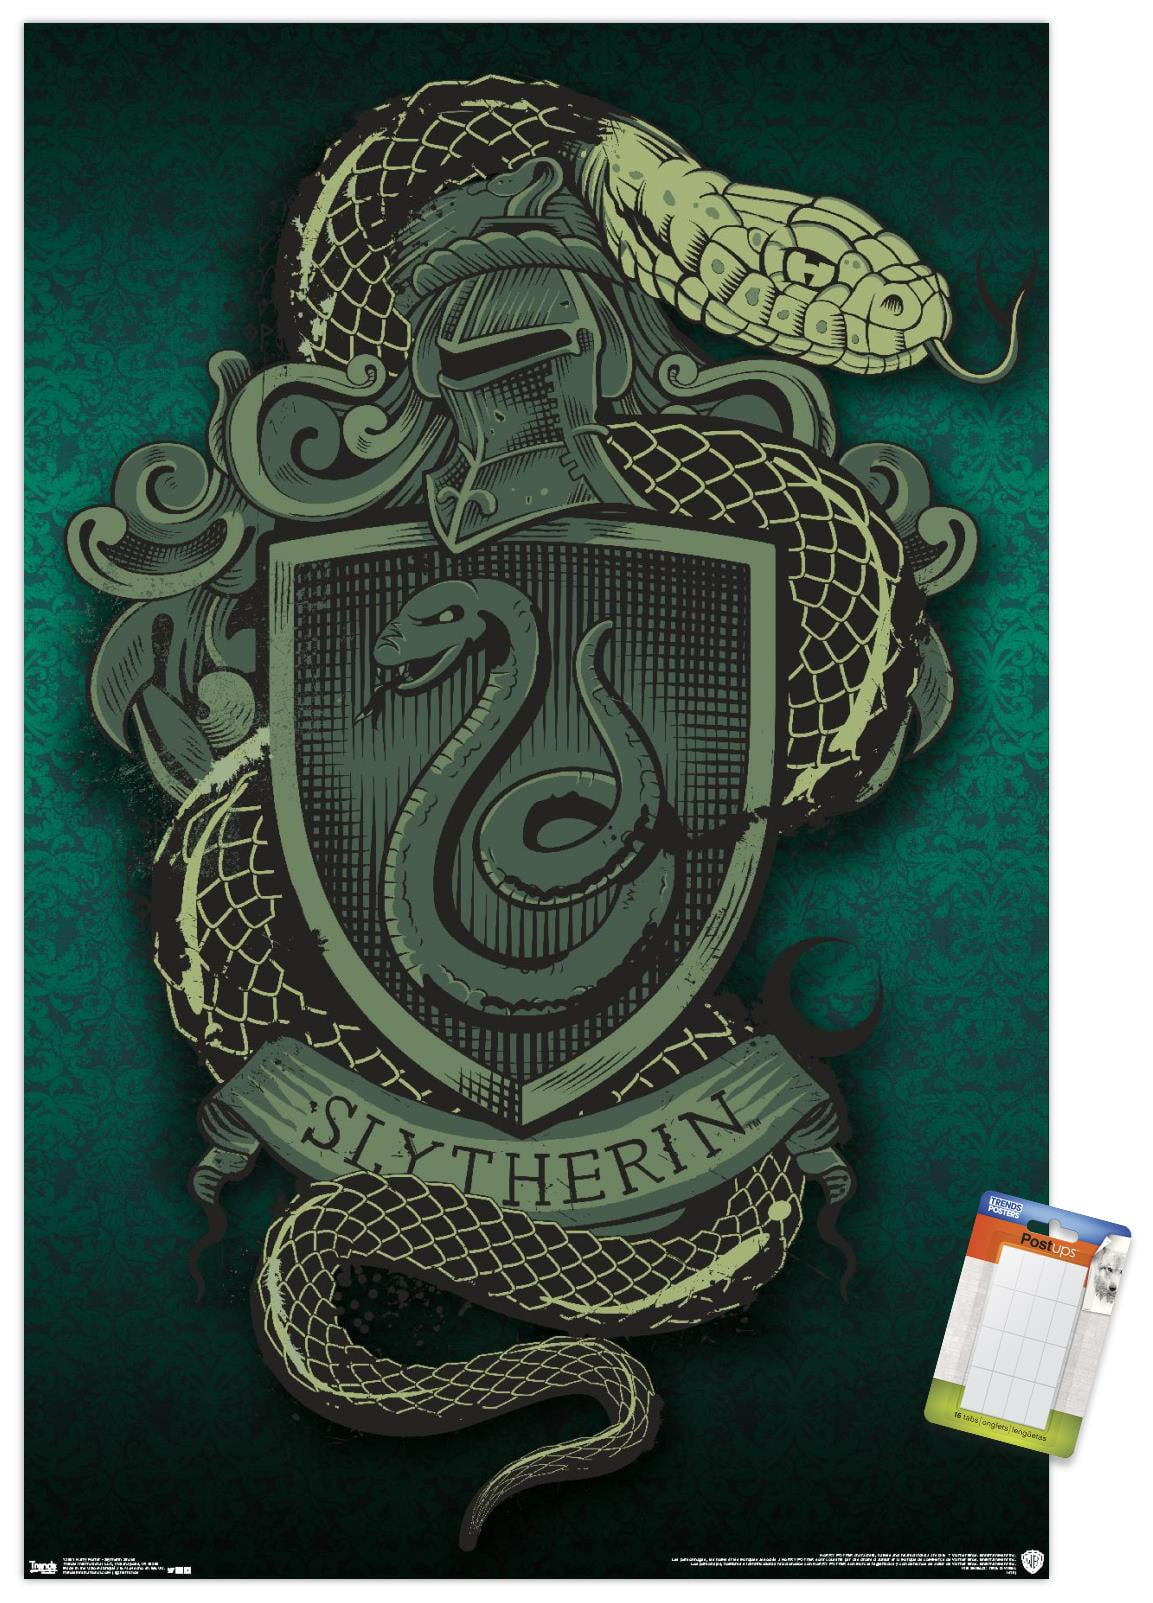 1-Harry Potter SLYTHERIN House Crest Standard Size Pillowcase New and Handmade! 